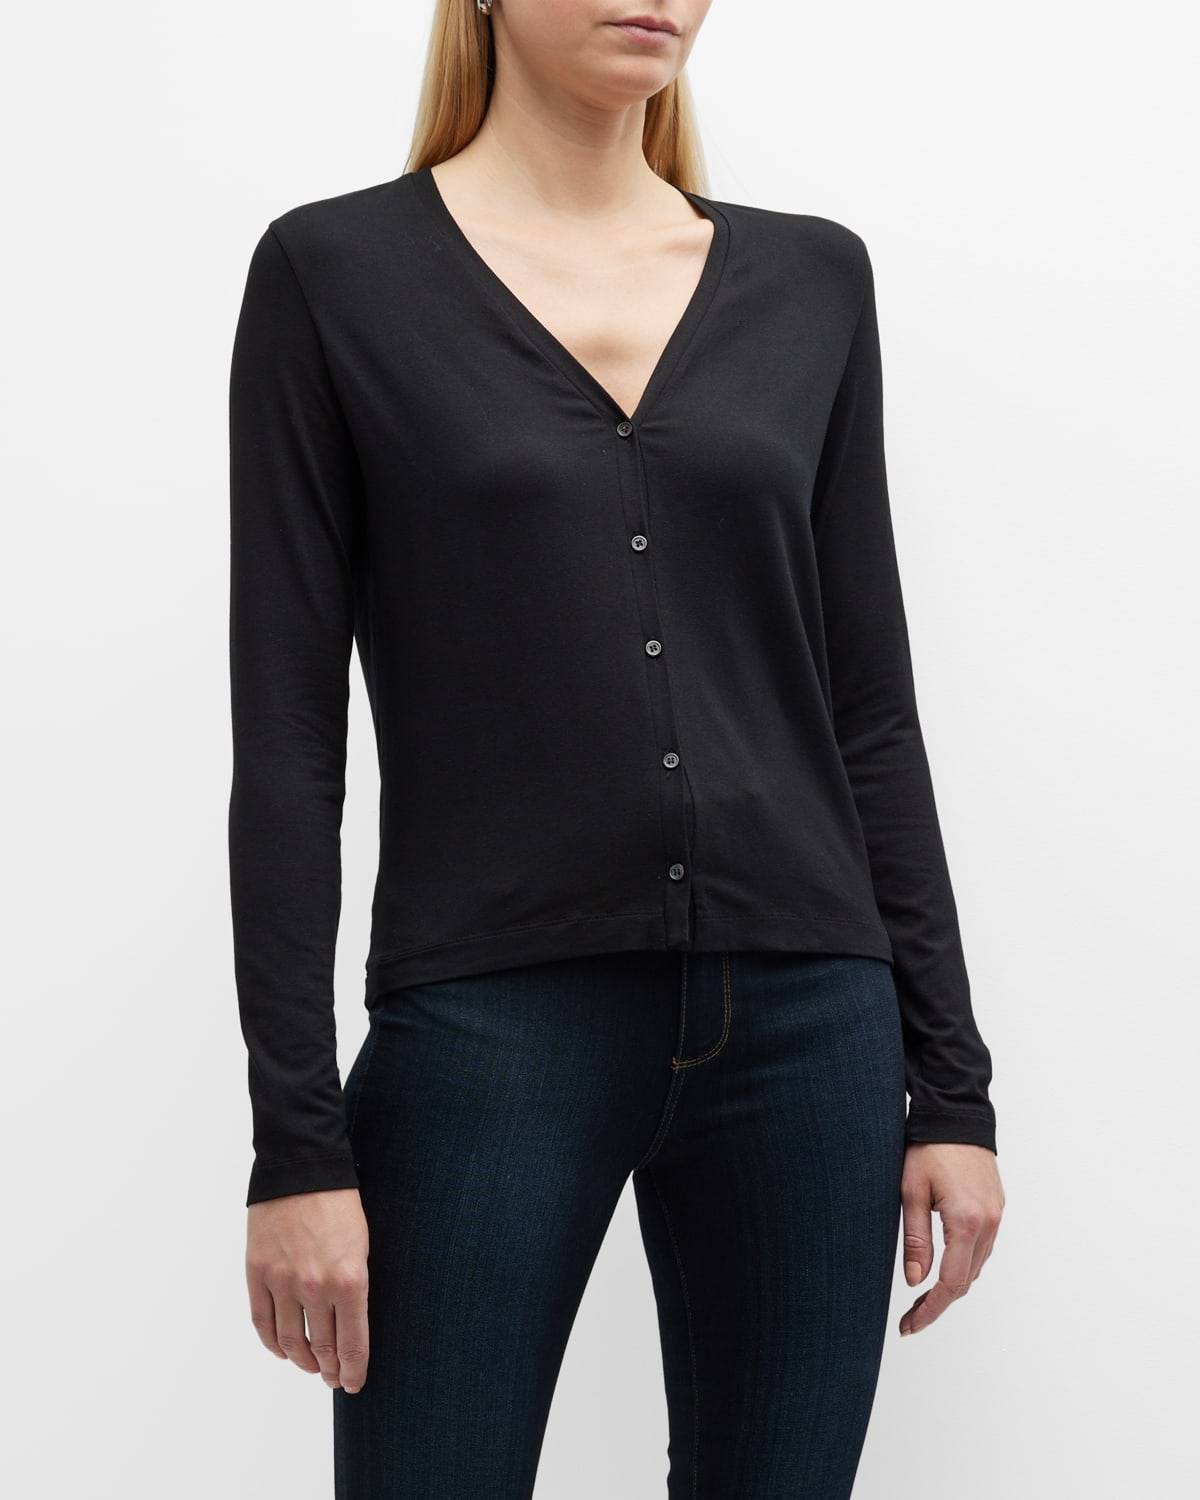 Majestic Women's Soft Touch V-neck Cardigan In Noir